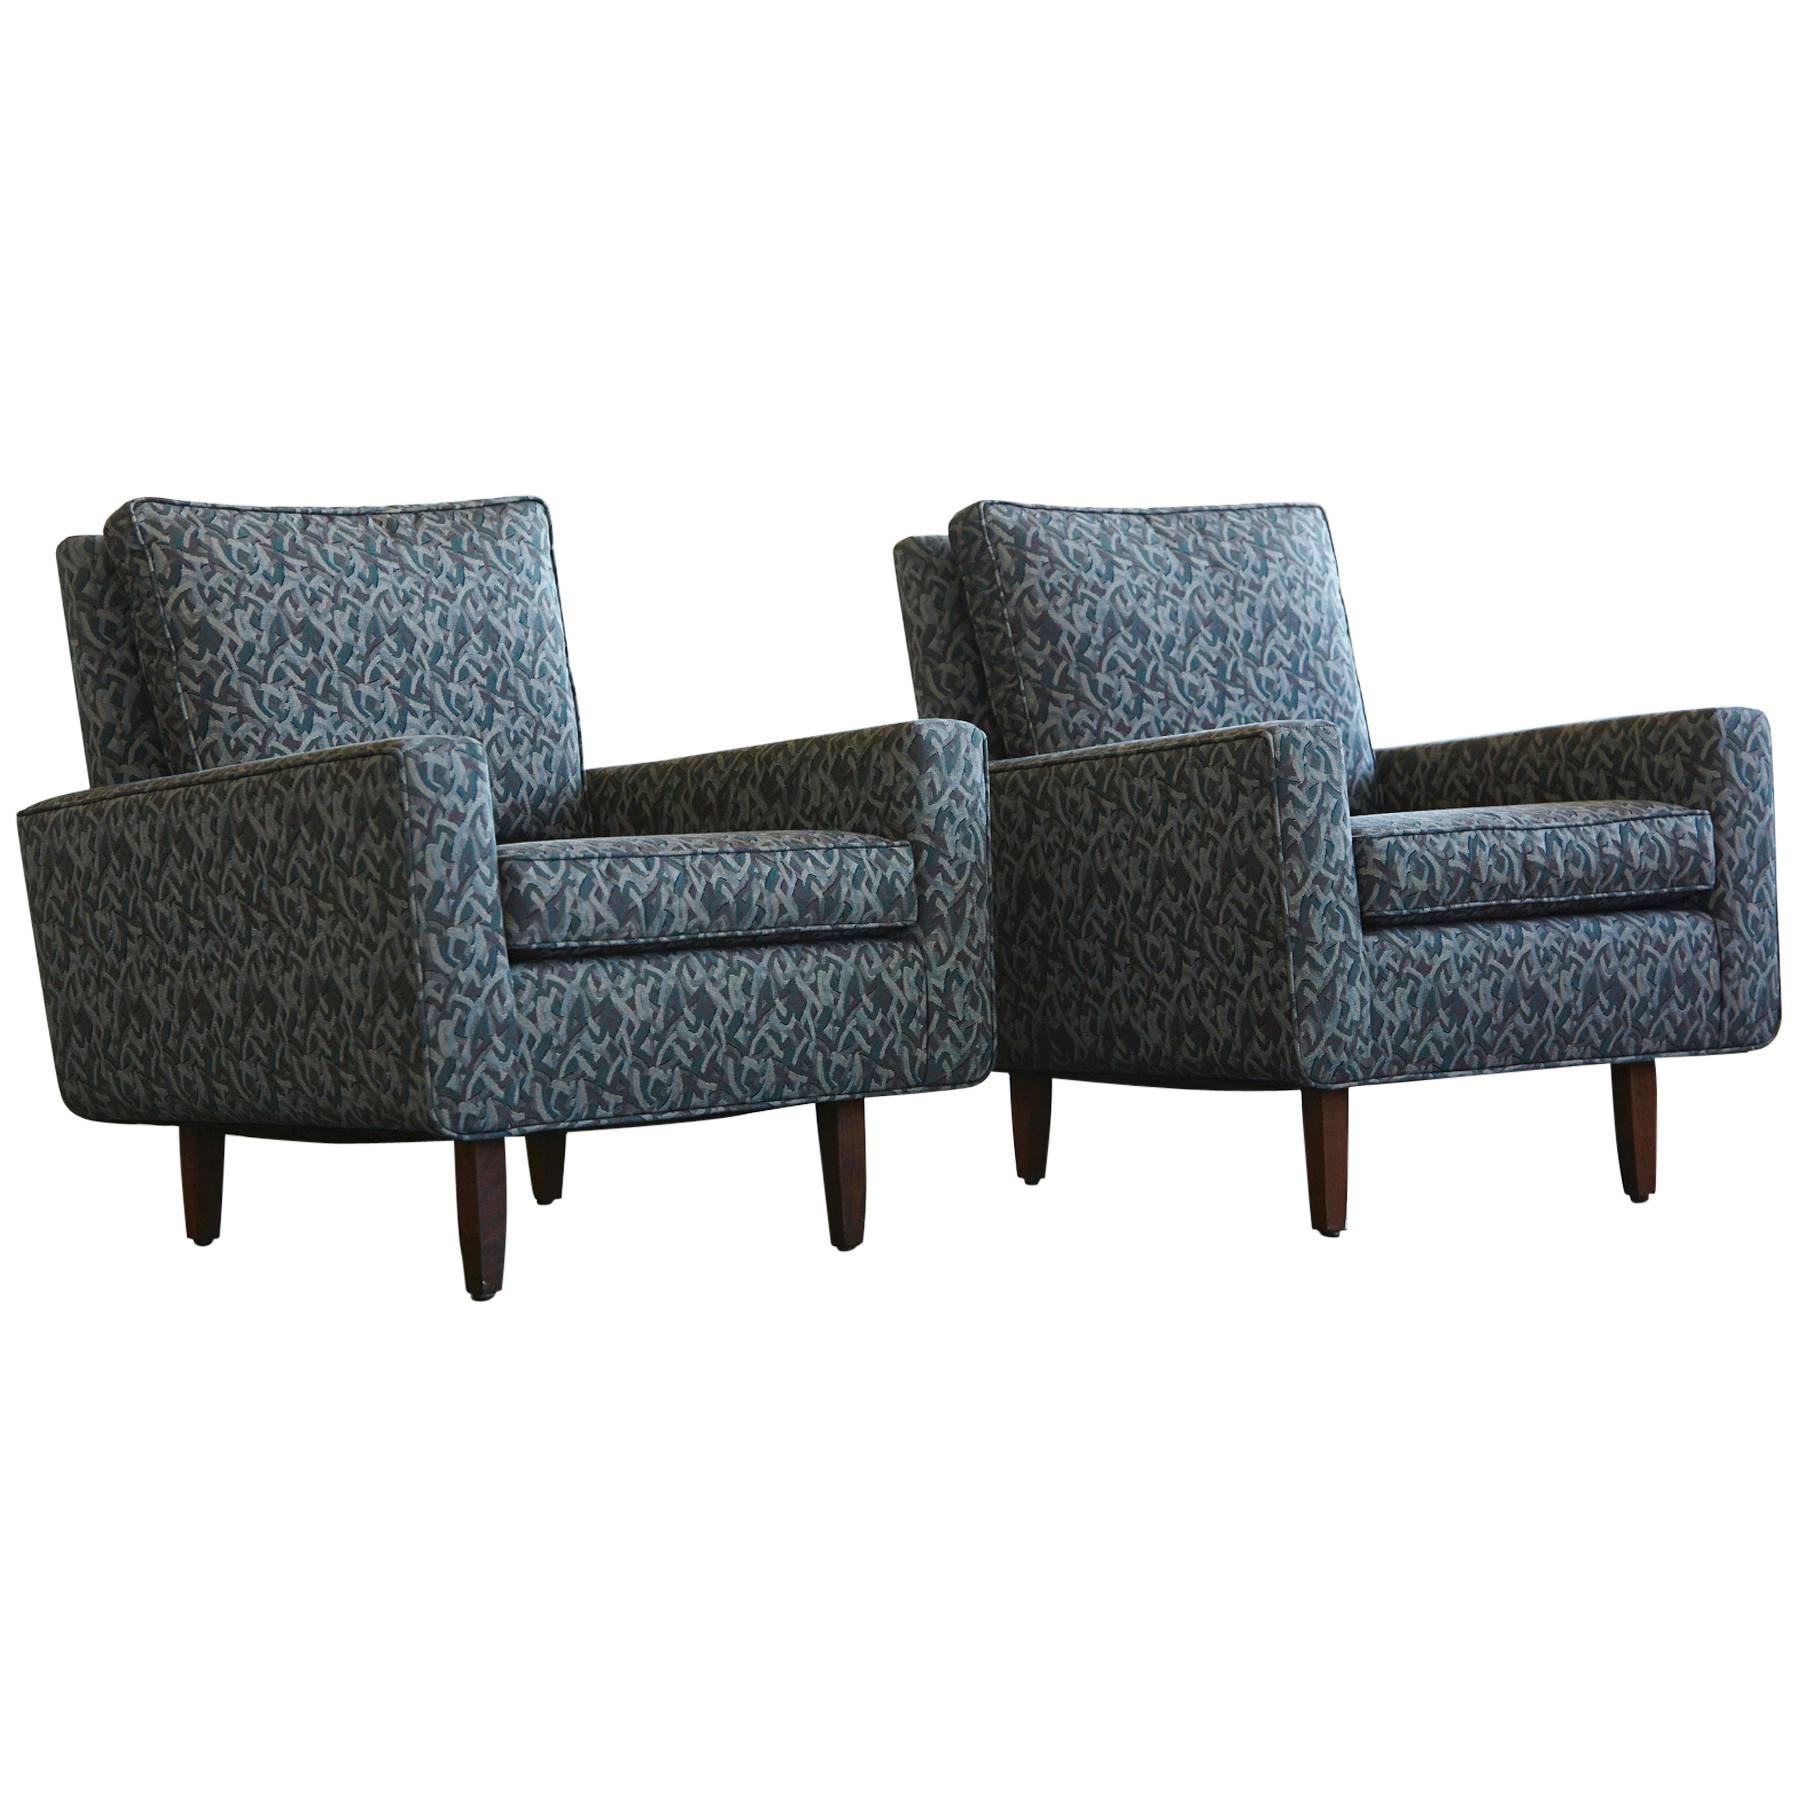 Pair of Early Florence Knoll Lounge Chairs from 1967, Reupholstered in the 1980s